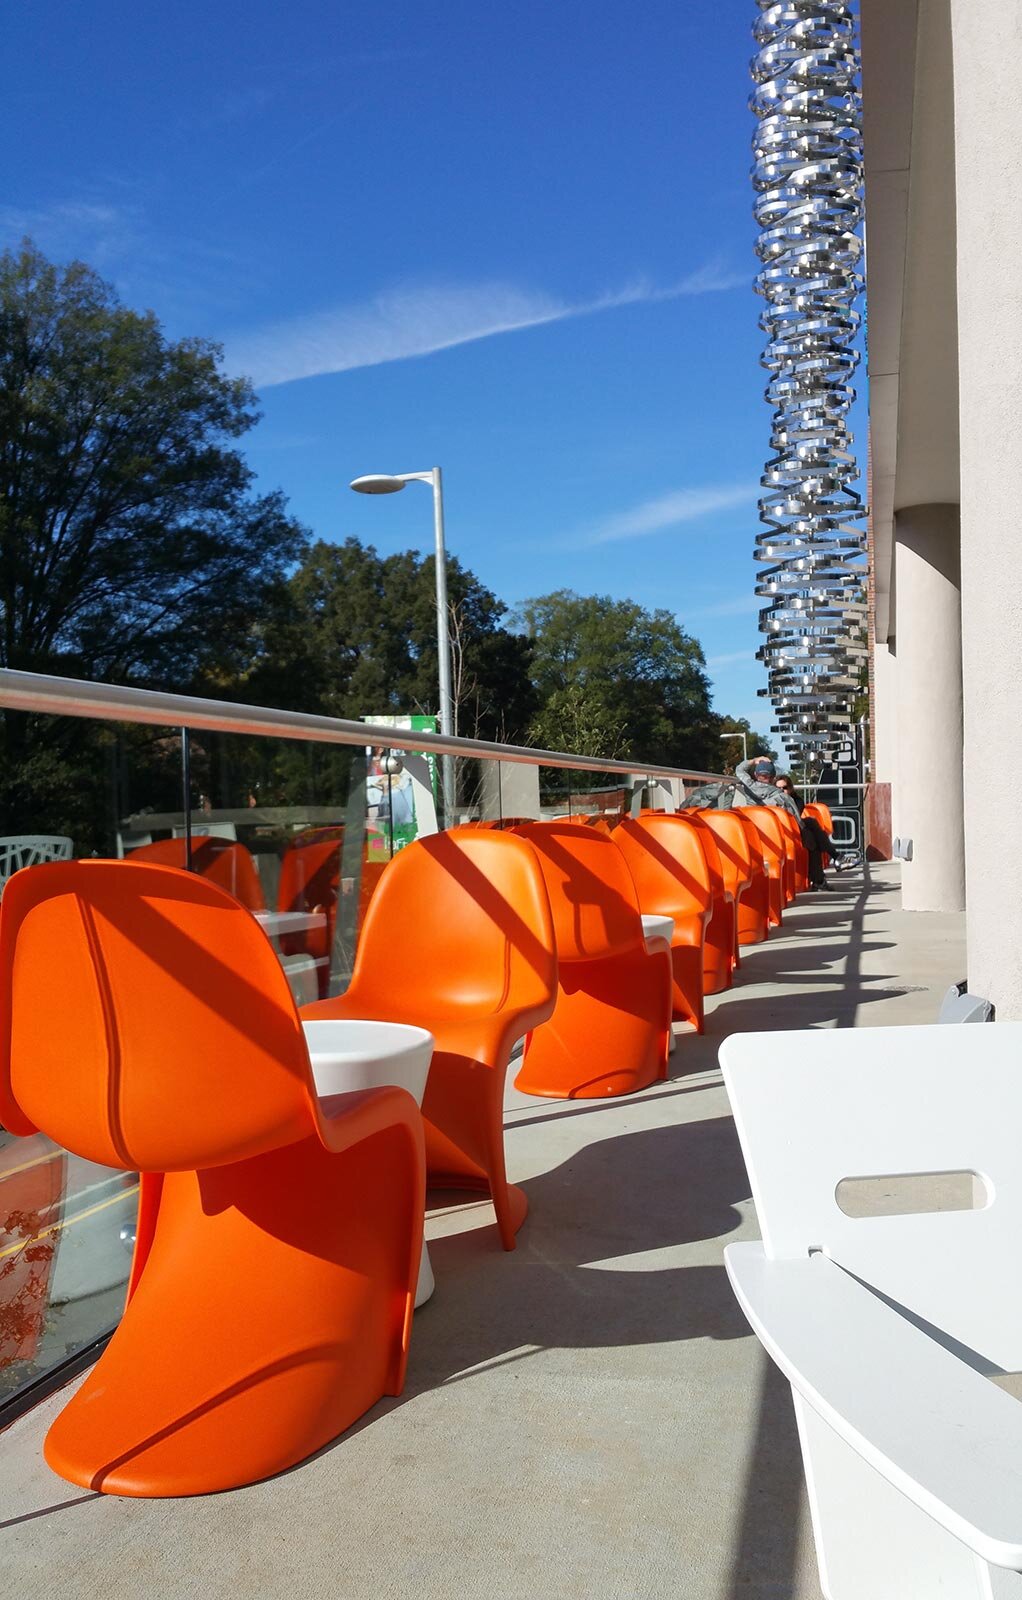 Exterior seating area with orange chairs and a view of the steel sculpture